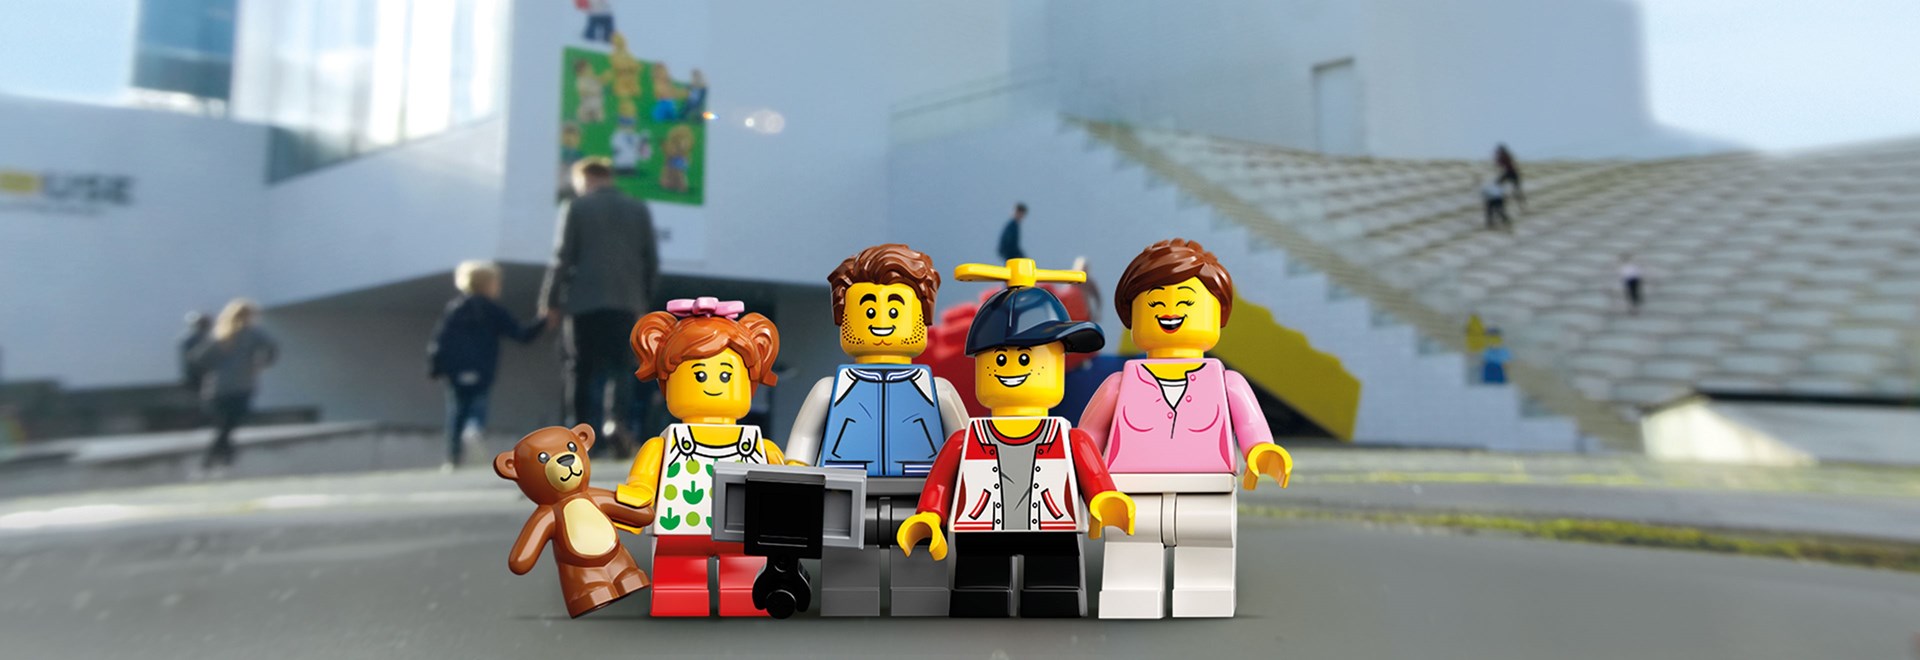 Buy an annual pass to LEGO House and come as often as you like